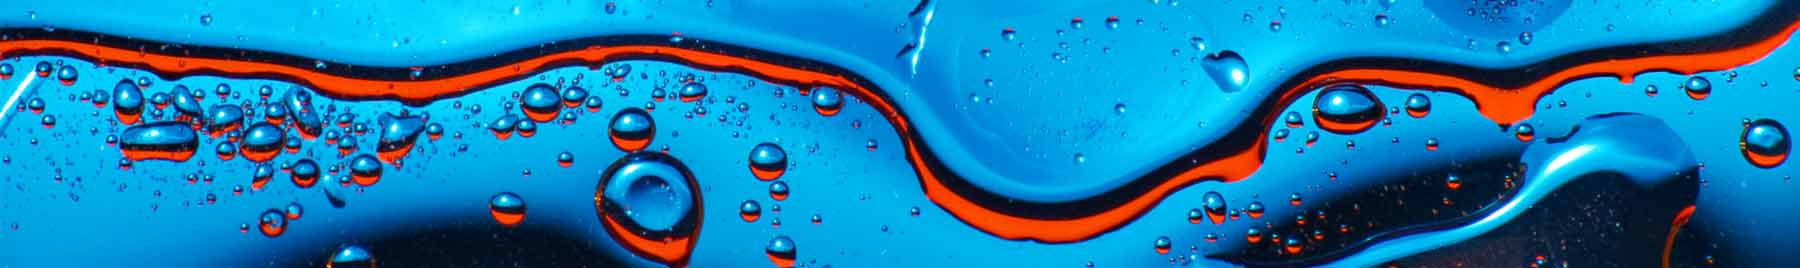 blue and red oil on water